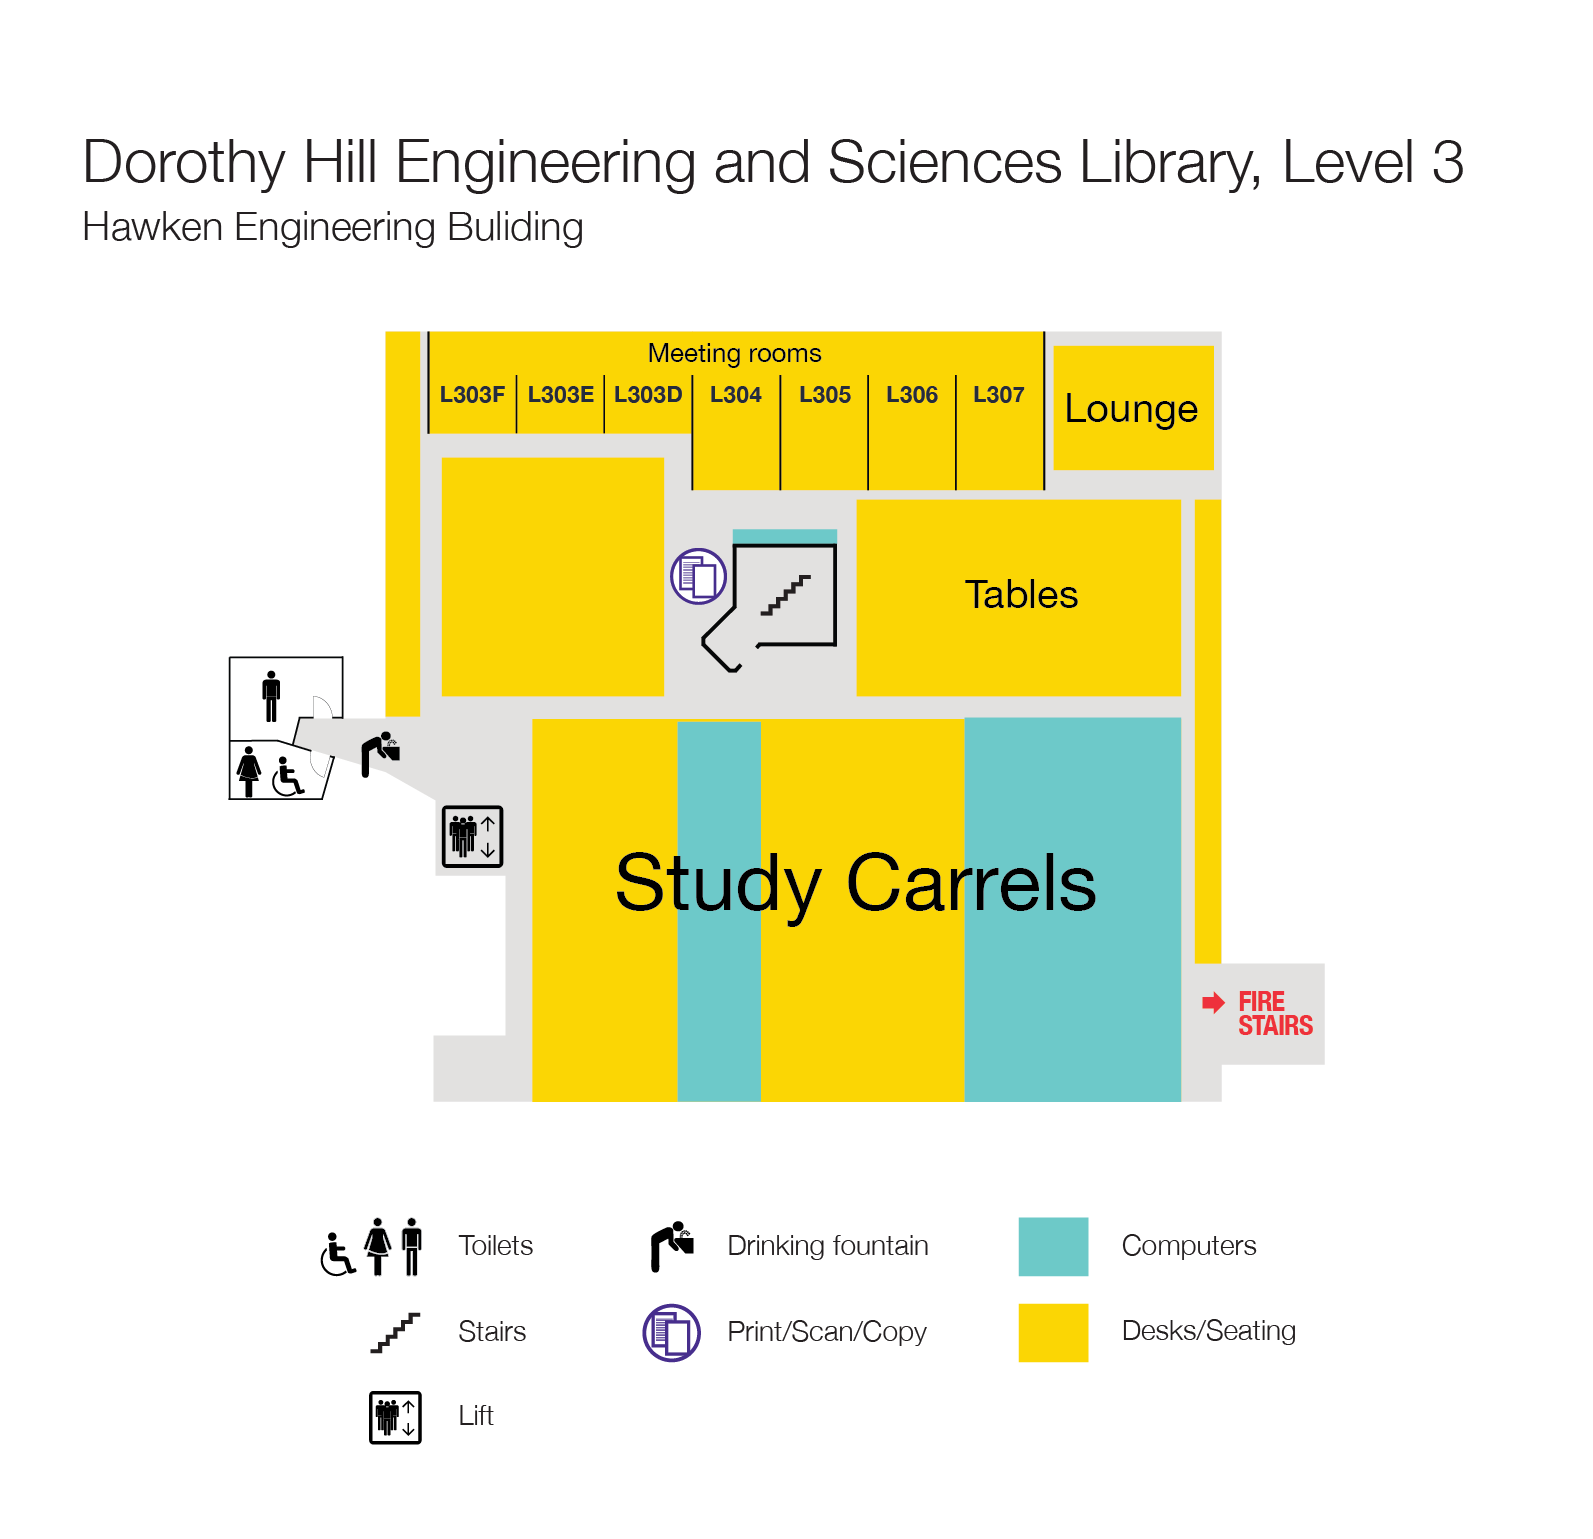 Level 3 floor plan, Dorothy Hill Engineering and Sciences Library